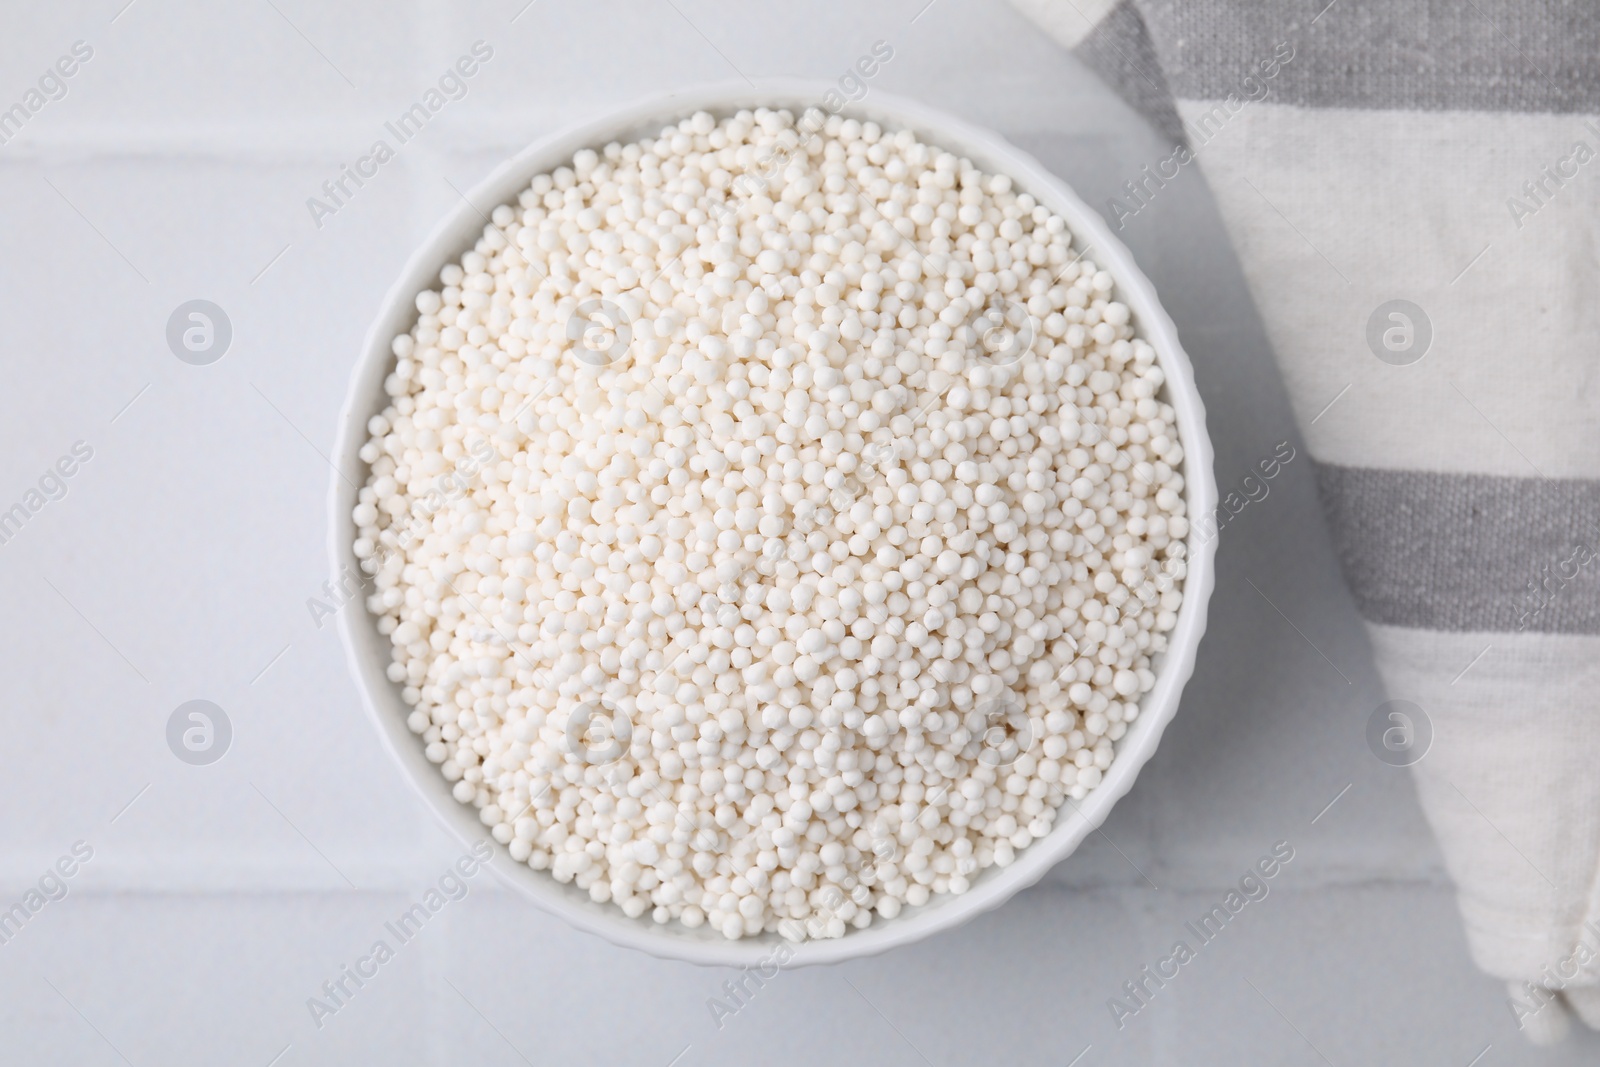 Photo of Tapioca pearls in bowl on white tiled table, top view